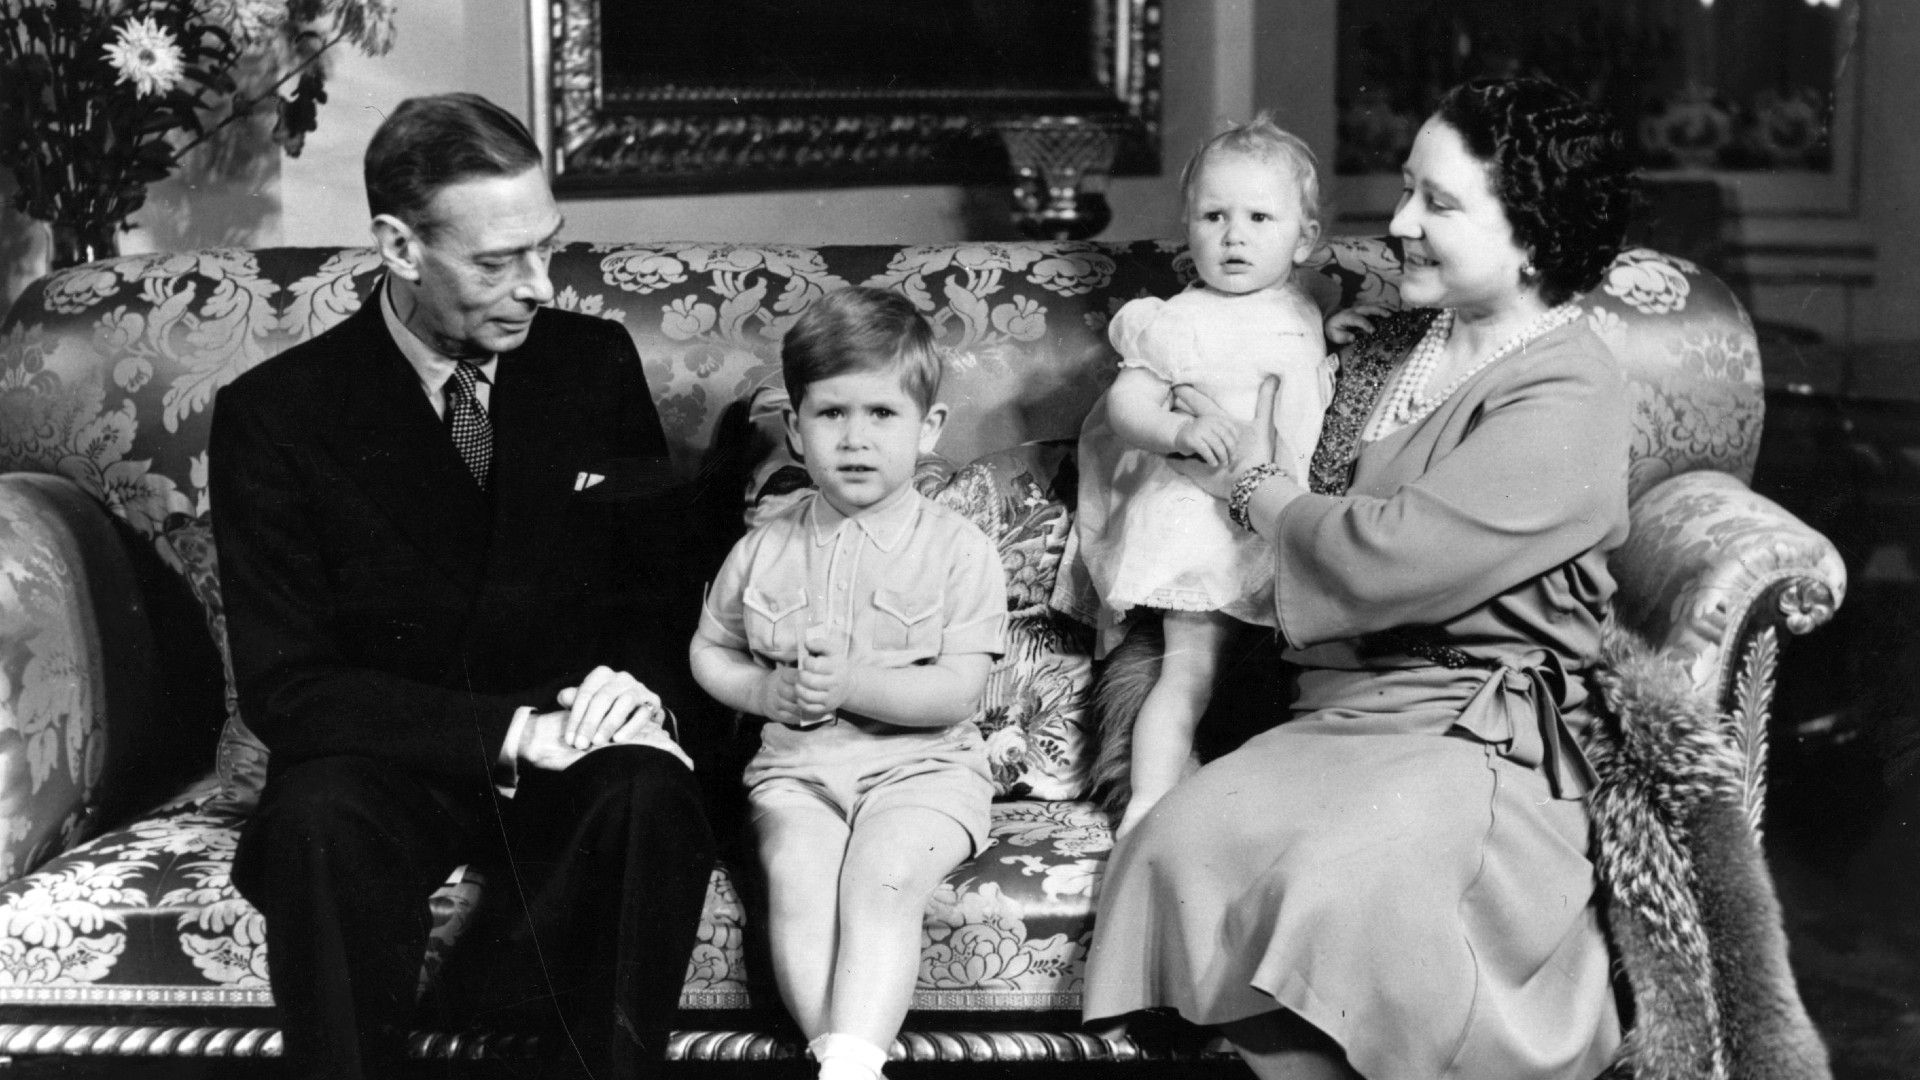 <p>                     In 1951, the Royal Family got together to celebrate the third birthday of Prince Charles. The first grandchild of King George VI and the Queen Mother, the pair look delighted to simply be playing the role of grandparents as they pose with Charles and his younger sister, Princess Anne.                   </p>                                      <p>                     This heart-warming photo becomes more special because it would be one of the last where the future King, Charles, got to sit for a photograph with his grandfather. George VI died in February 1952, three months later.                   </p>